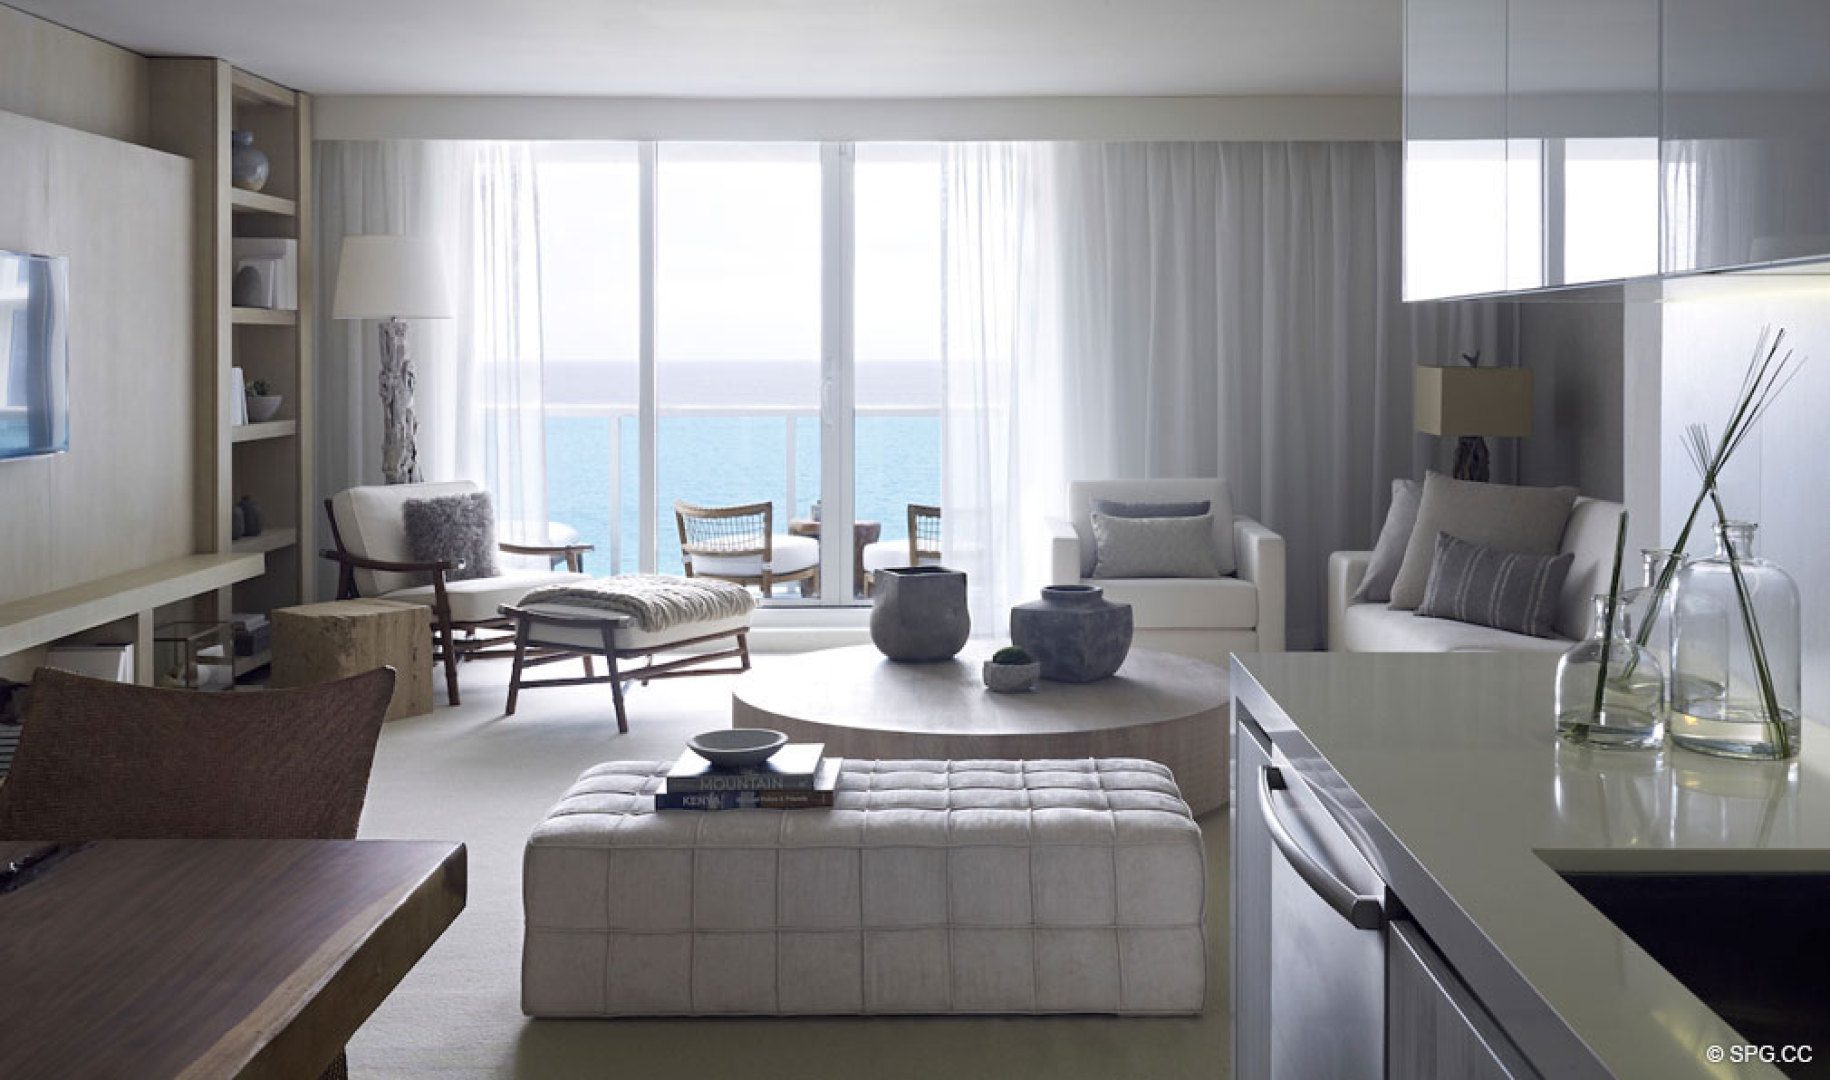 Living Room Design 2 at 1 Hotel & Homes South Beach, Luxury Oceanfront Condominiums Located at 2399 Collins Ave, Miami Beach, FL 33139